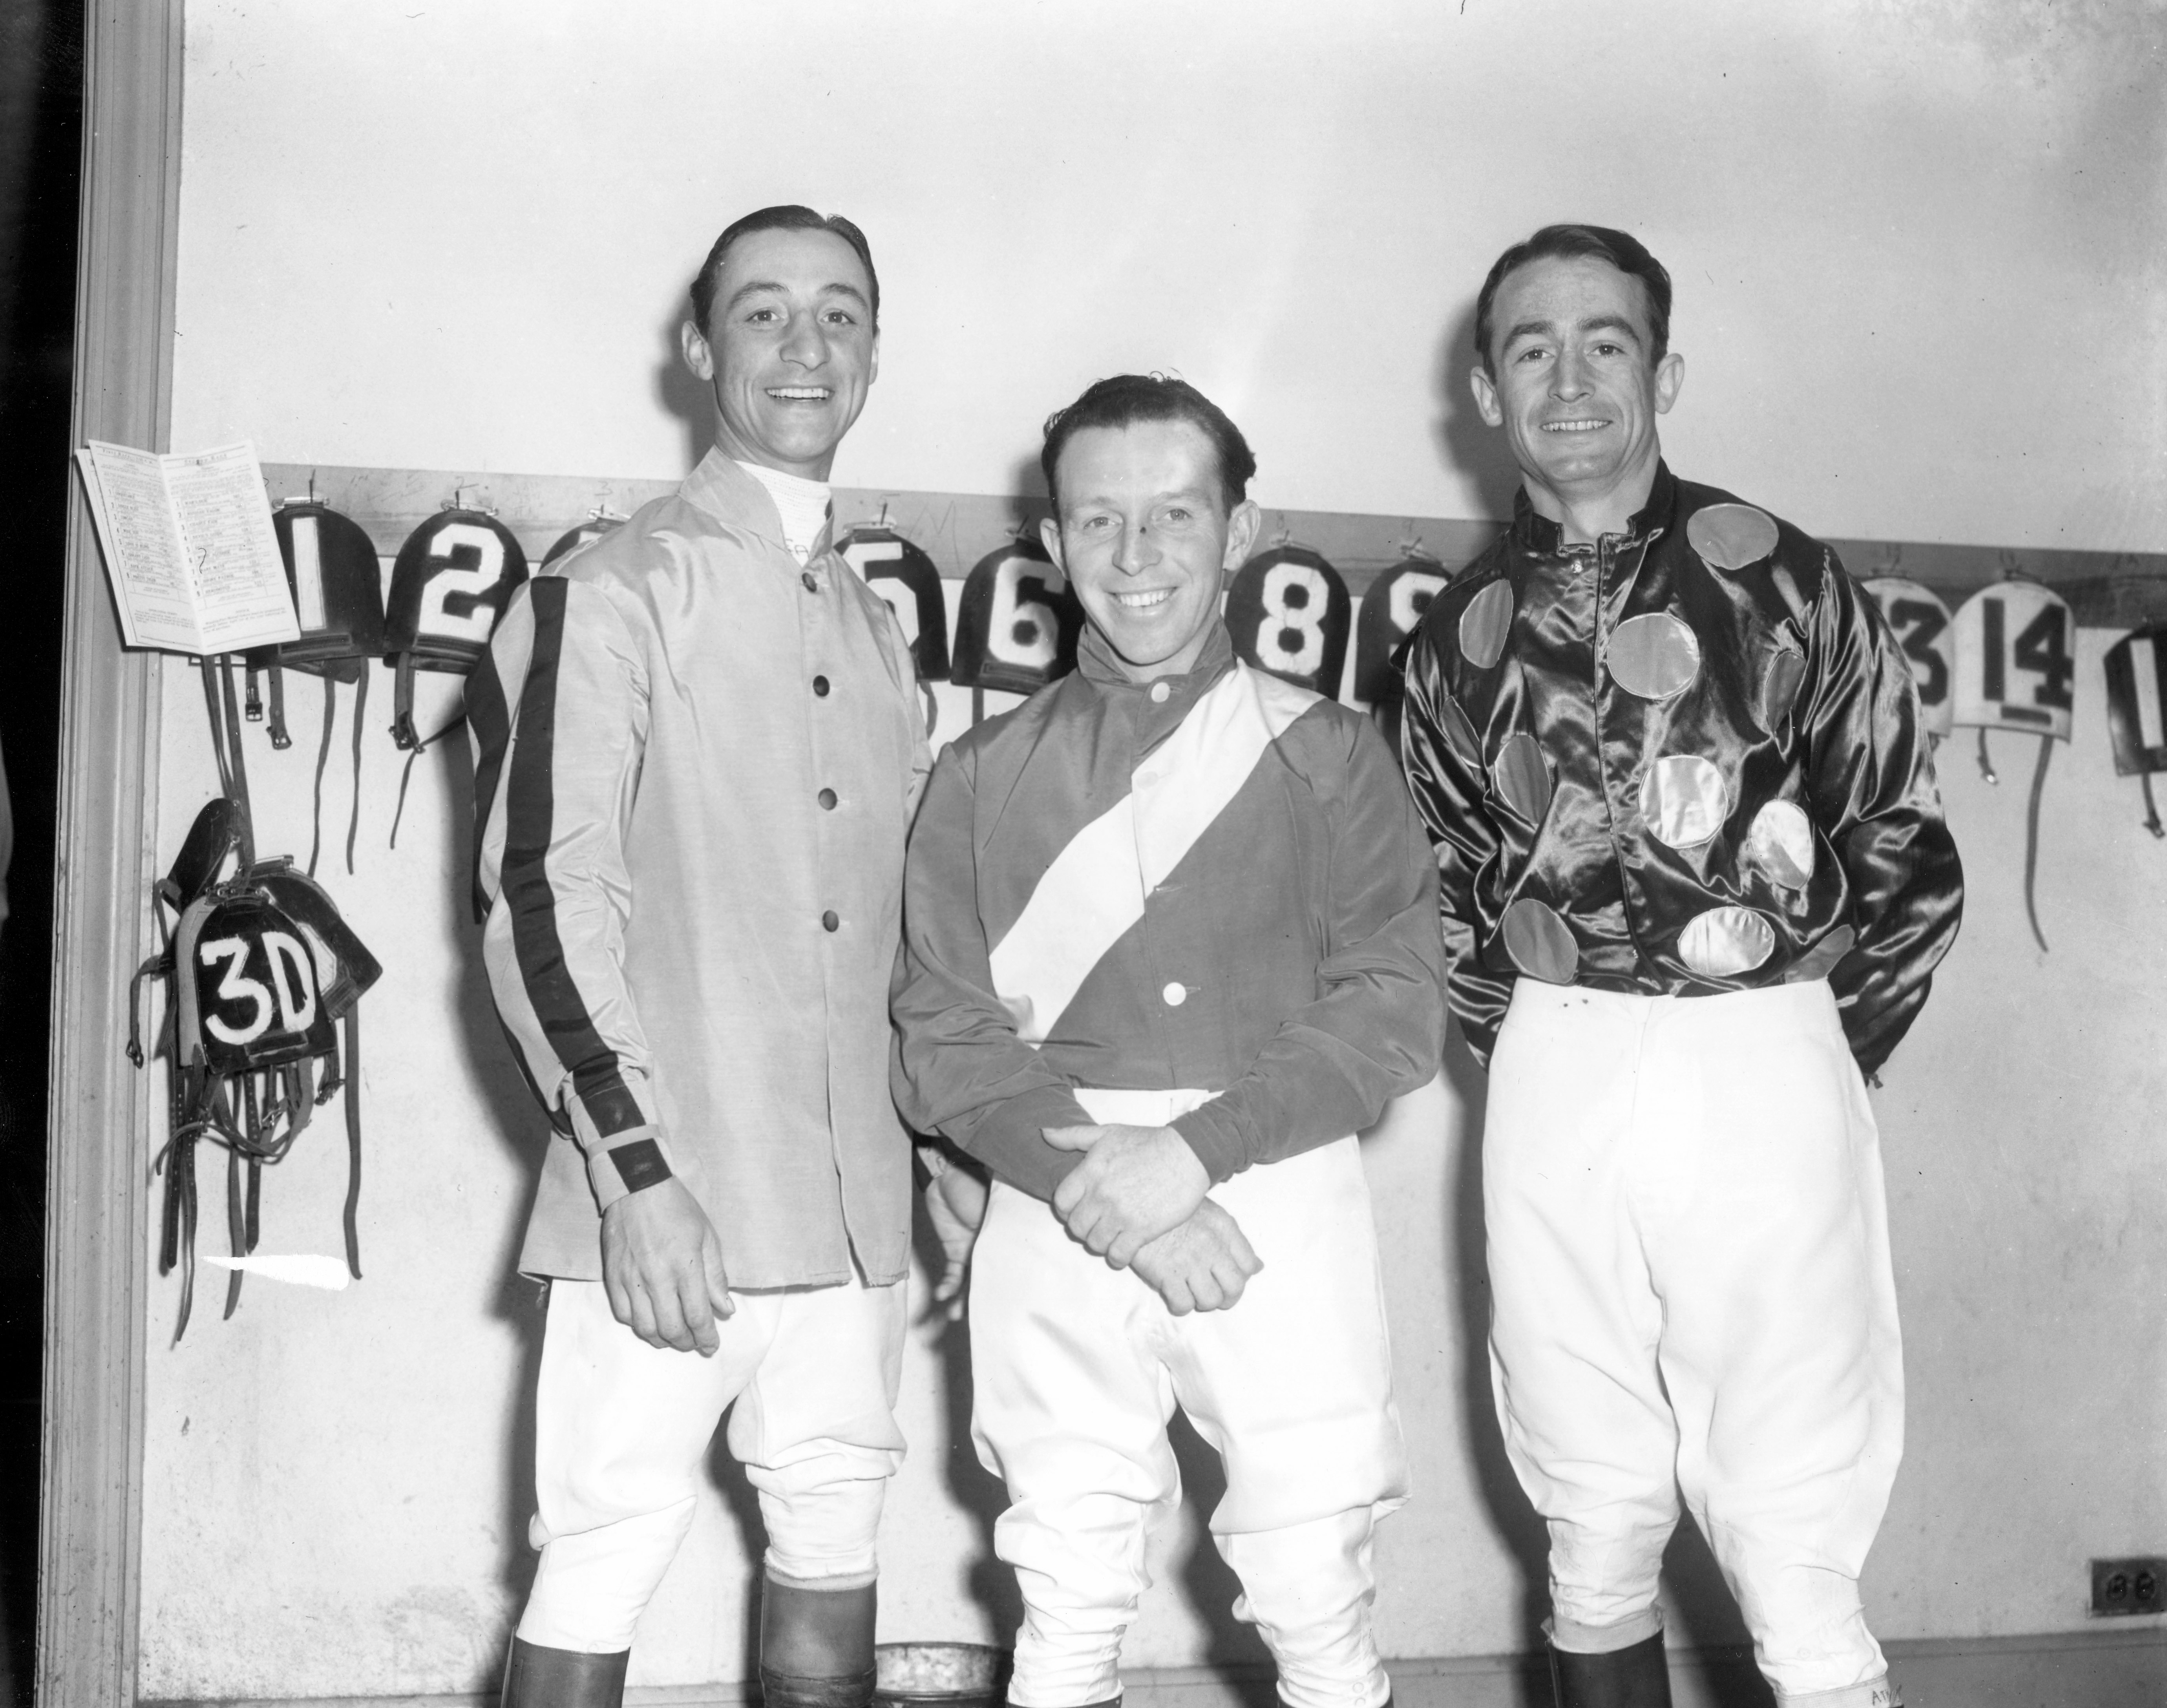 Eddie Arcaro, John Adams, and Ted Atkinson in the jock's room (Keeneland Library Morgan Collection/Museum Collection)